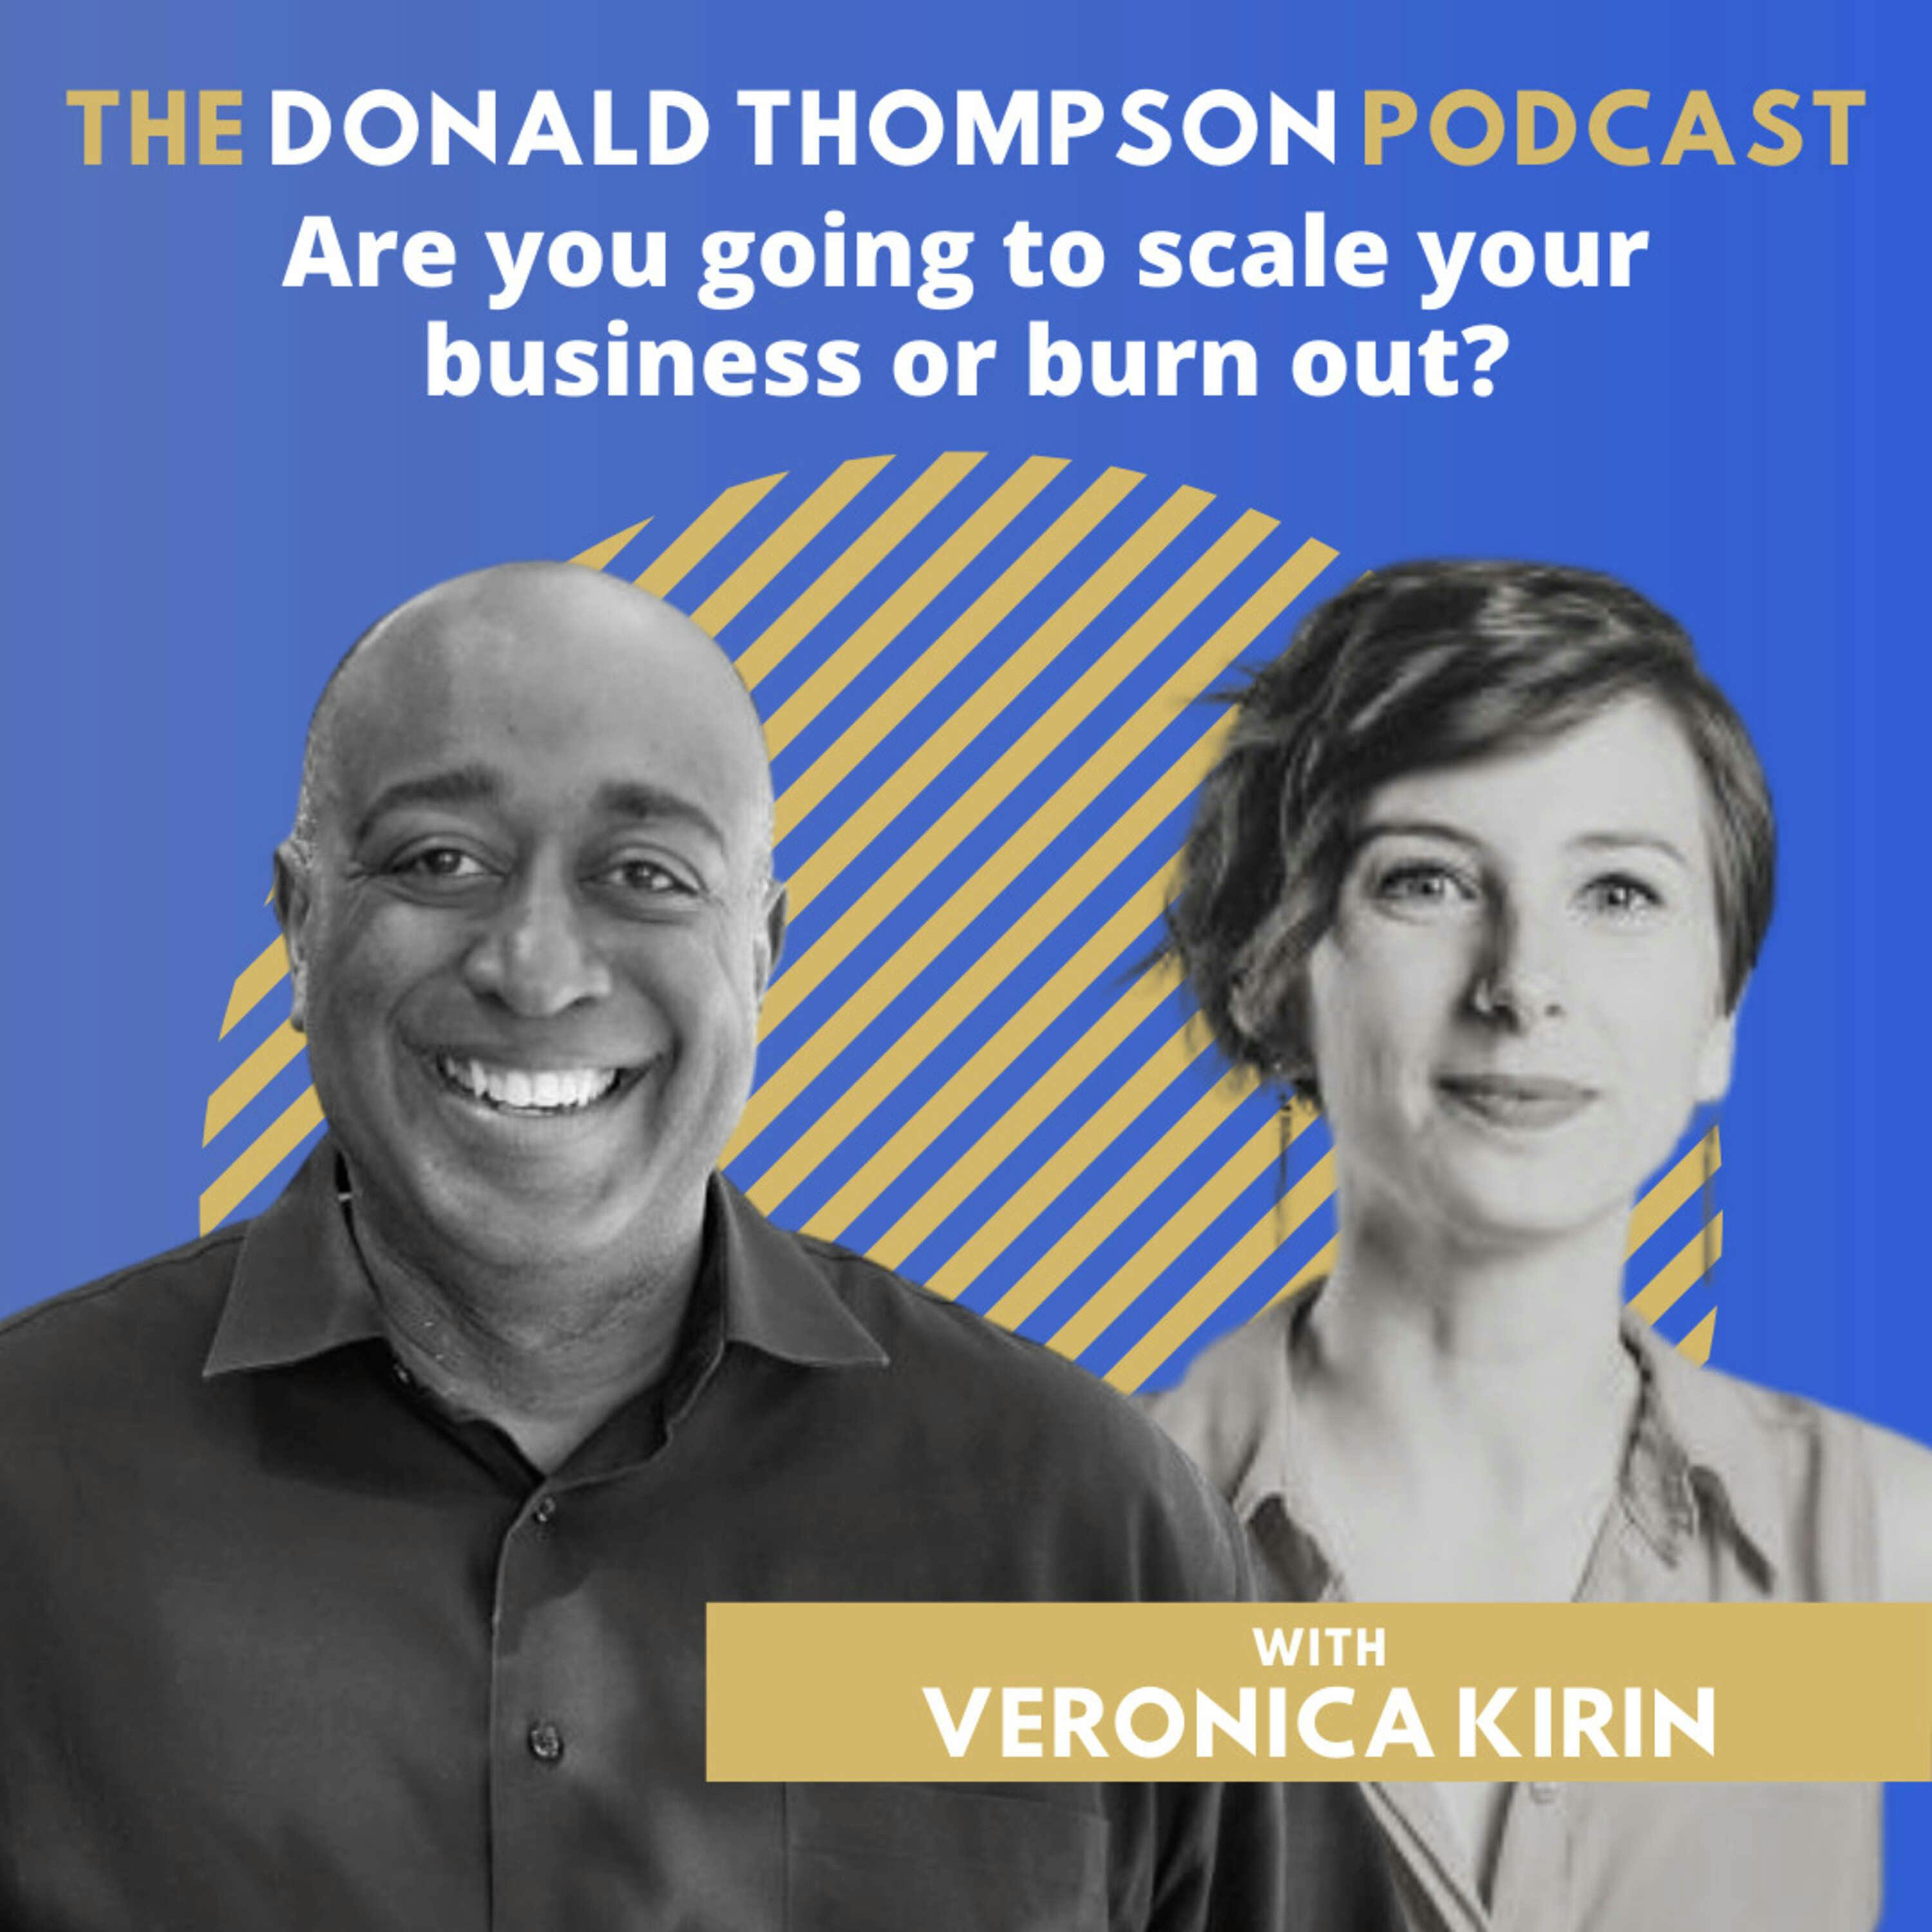 Veronica Kirin: Are you scaling your business, or burning out?